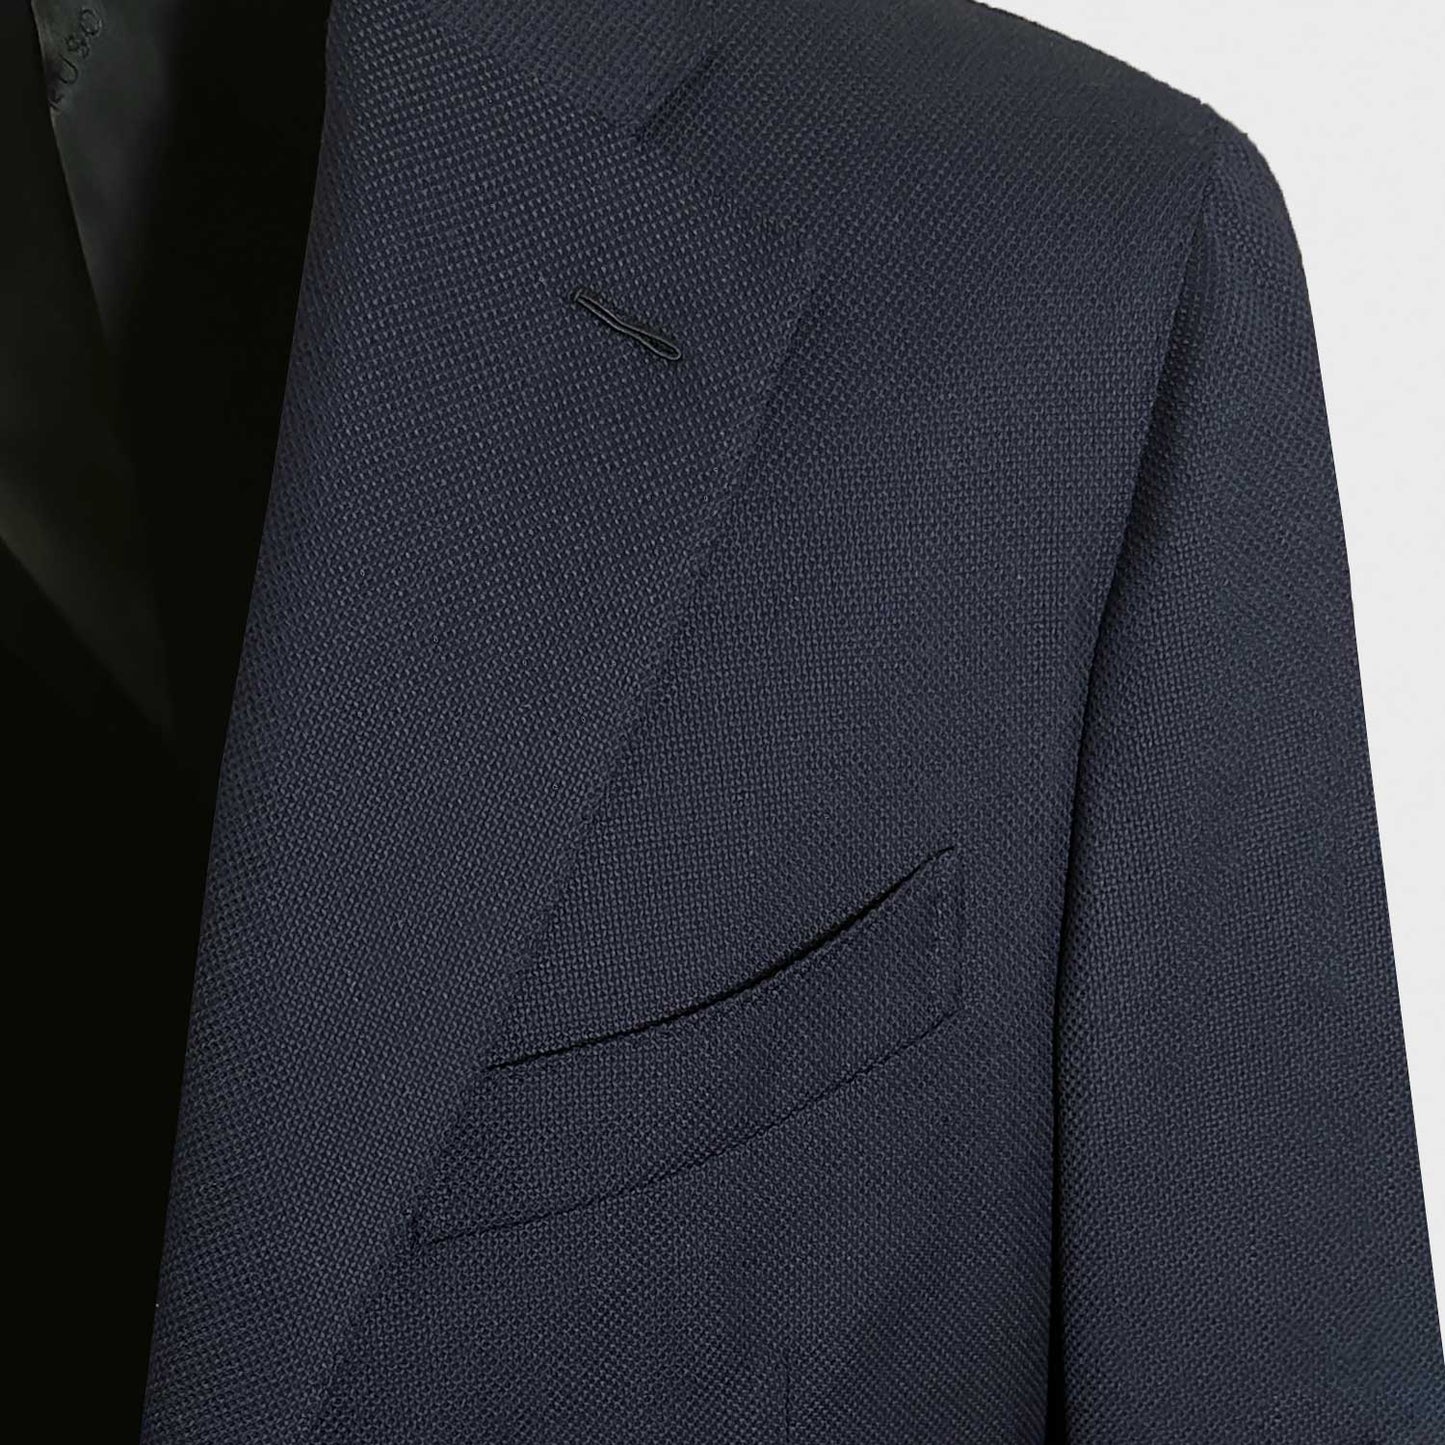 Men's navy hopsack blazer made in Italy by Caruso exclusively for Wools Boutique Uomo. This Caruso tailored wool hopsack jacket features classic fit with slightly structured profile, model Boheme not short classic fit, unlined, perfect for both formal occasions and smart casual outfit.